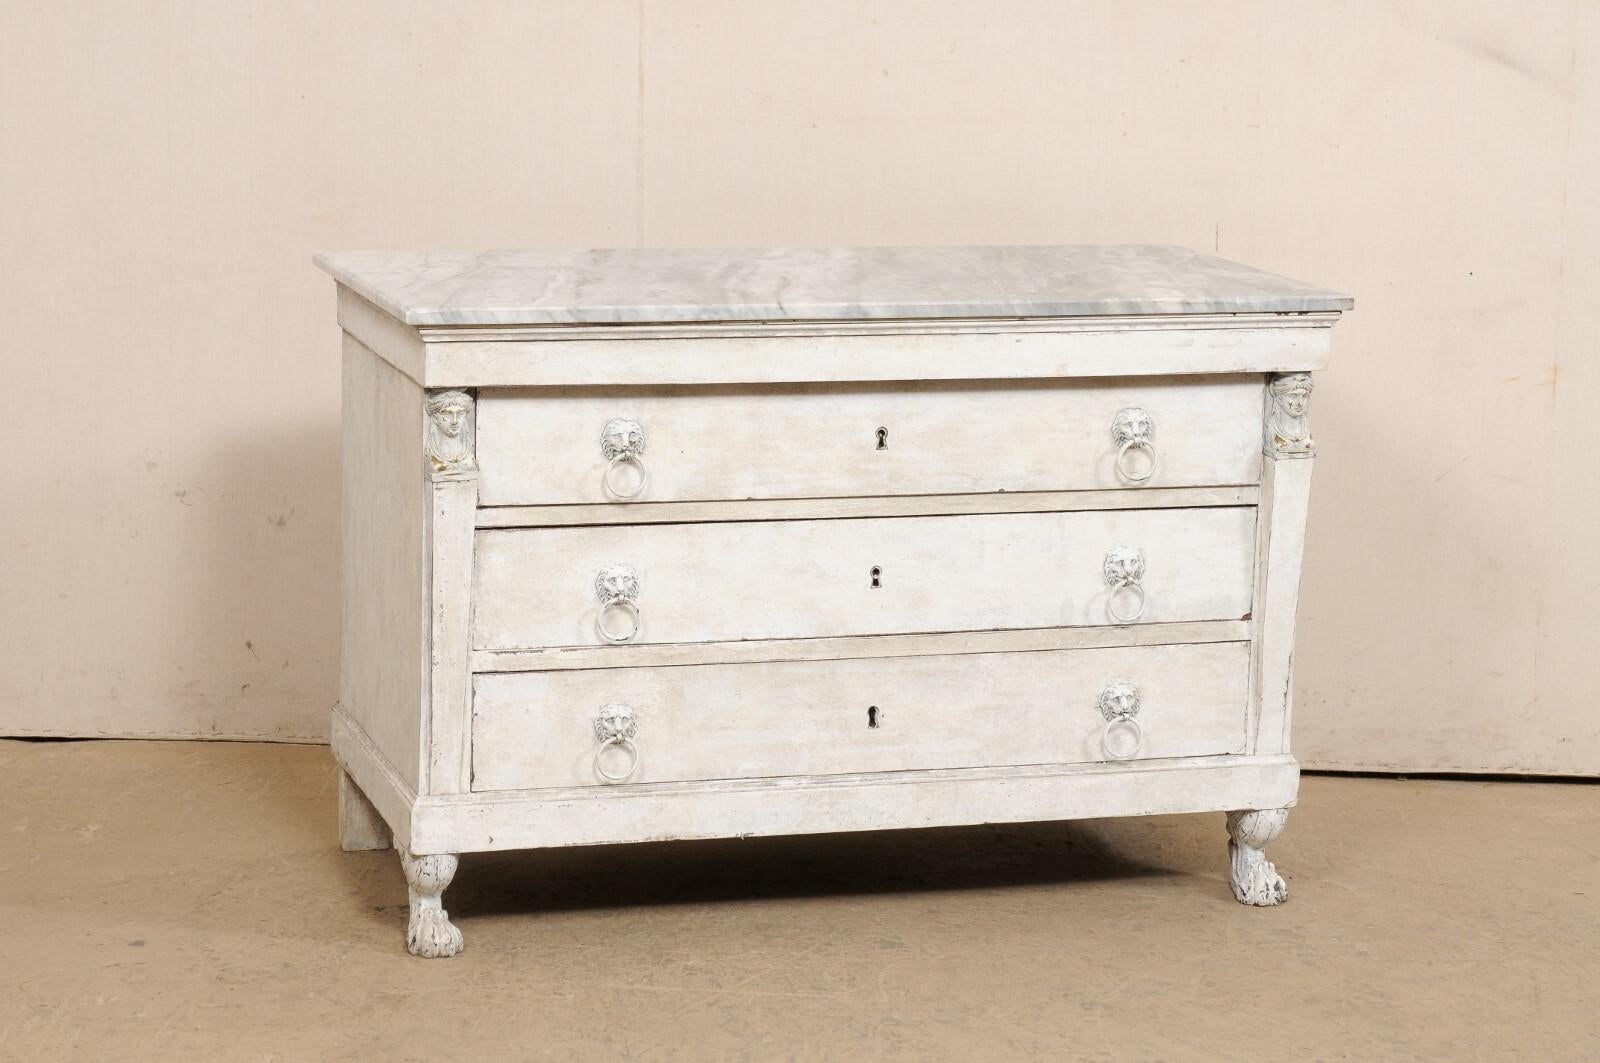 A French Neoclassic painted wood commode with marble top from the early 19th century. This antique chest from France features a rectangular-shaped white/gray marble top, above a case designed with clean lines and column-style side posts flanking the